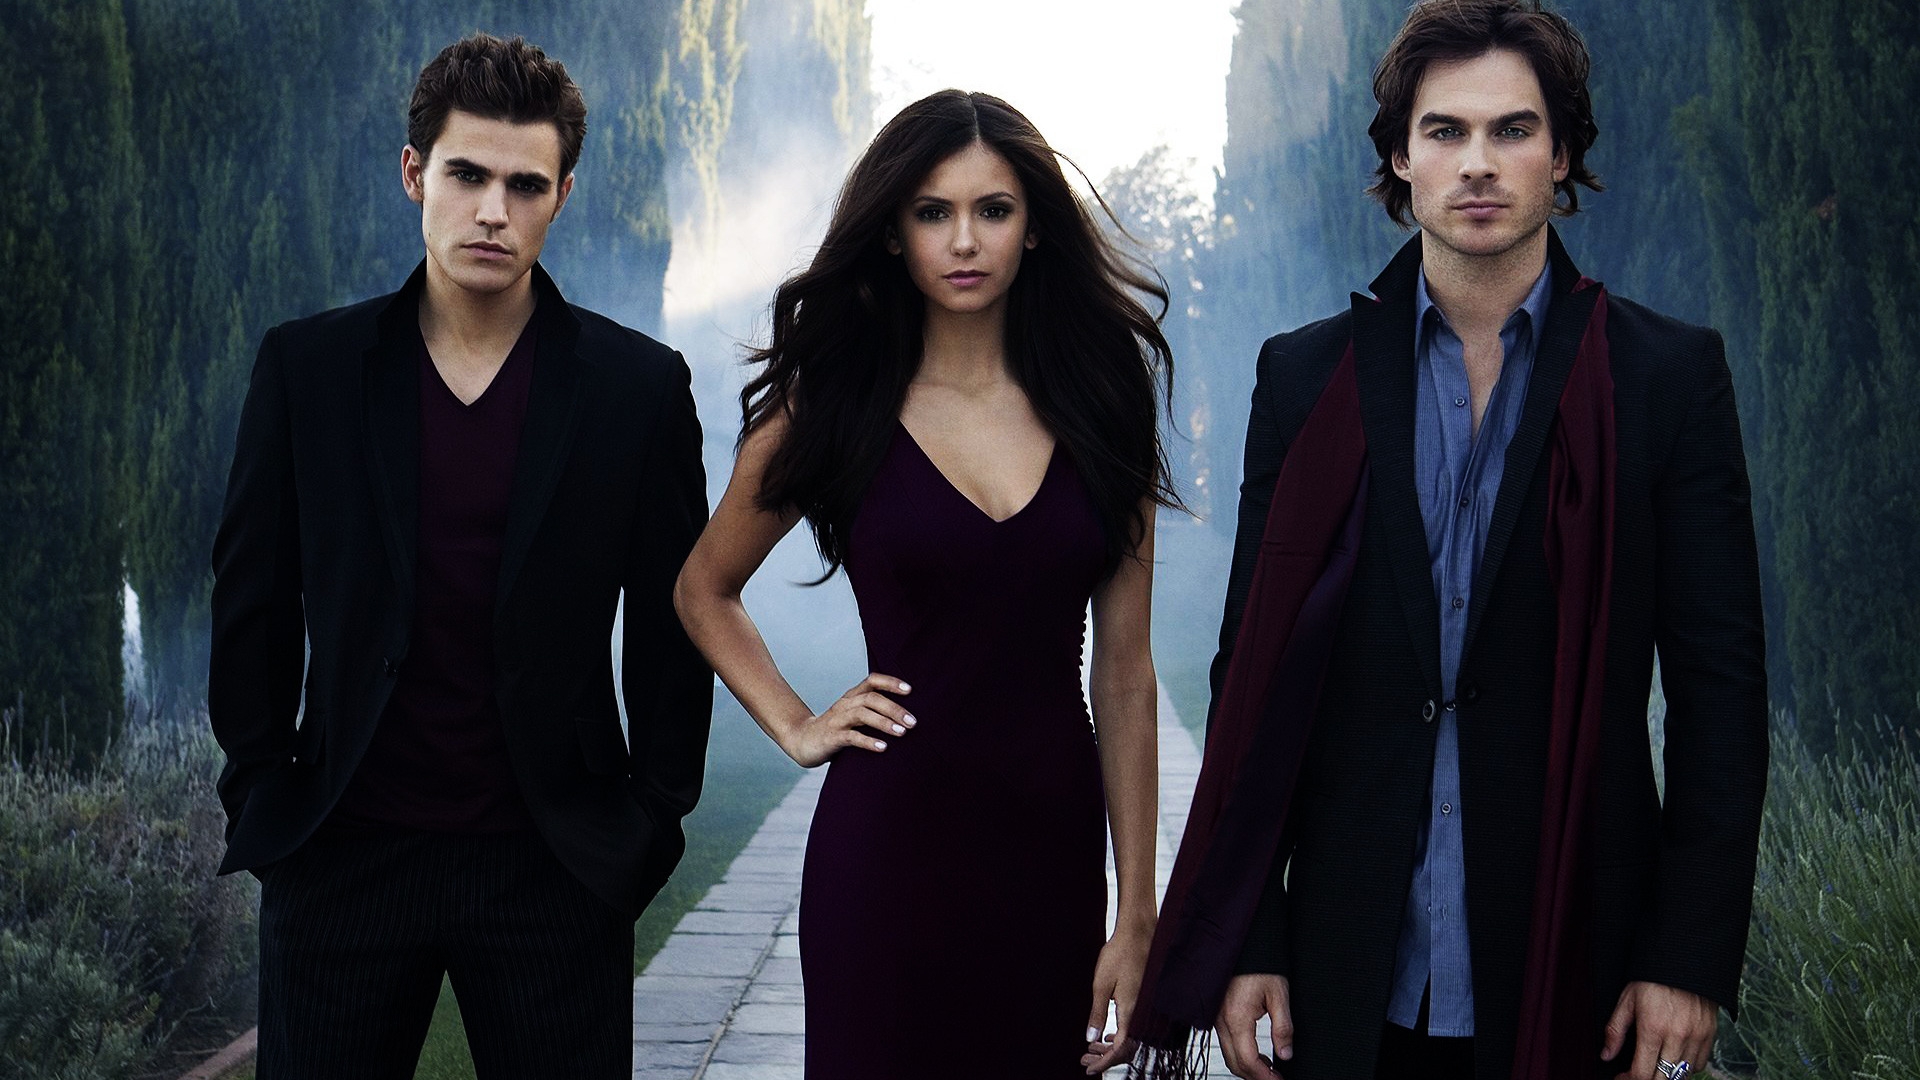 The Vampire Diaries Poster for 1920 x 1080 HDTV 1080p resolution